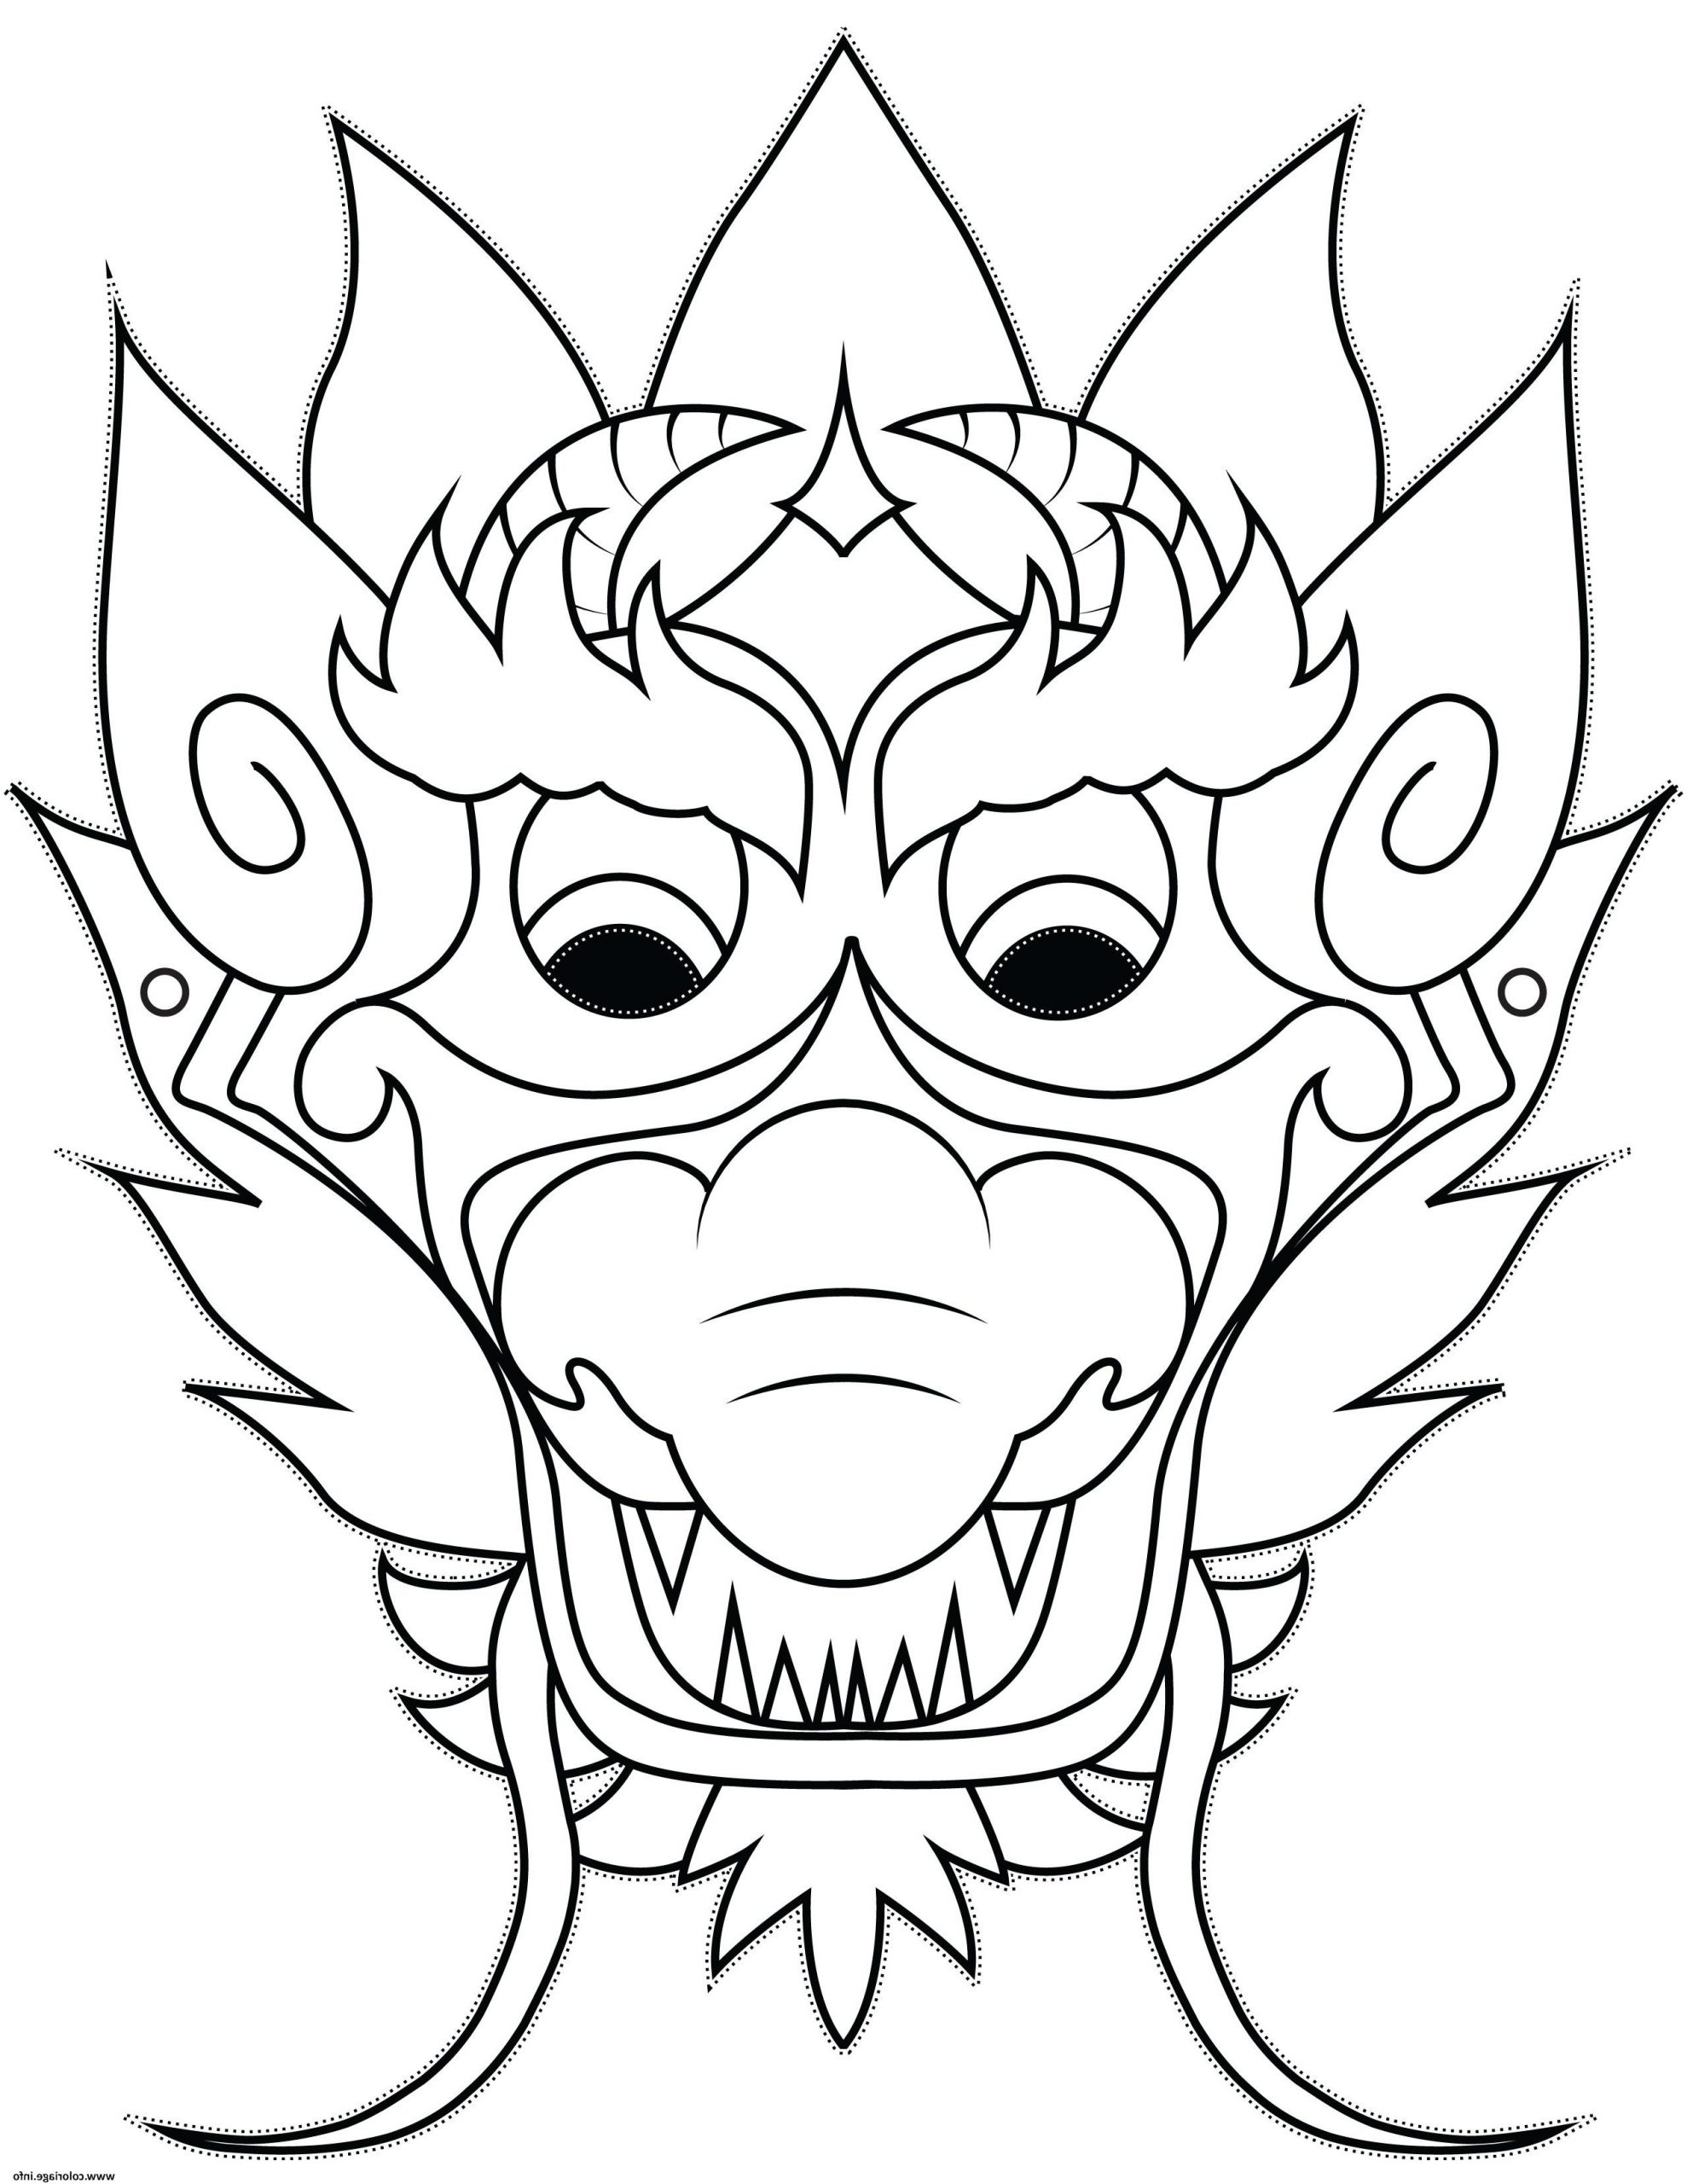 2018 nouvel an chinois masque mask coloriage dessin